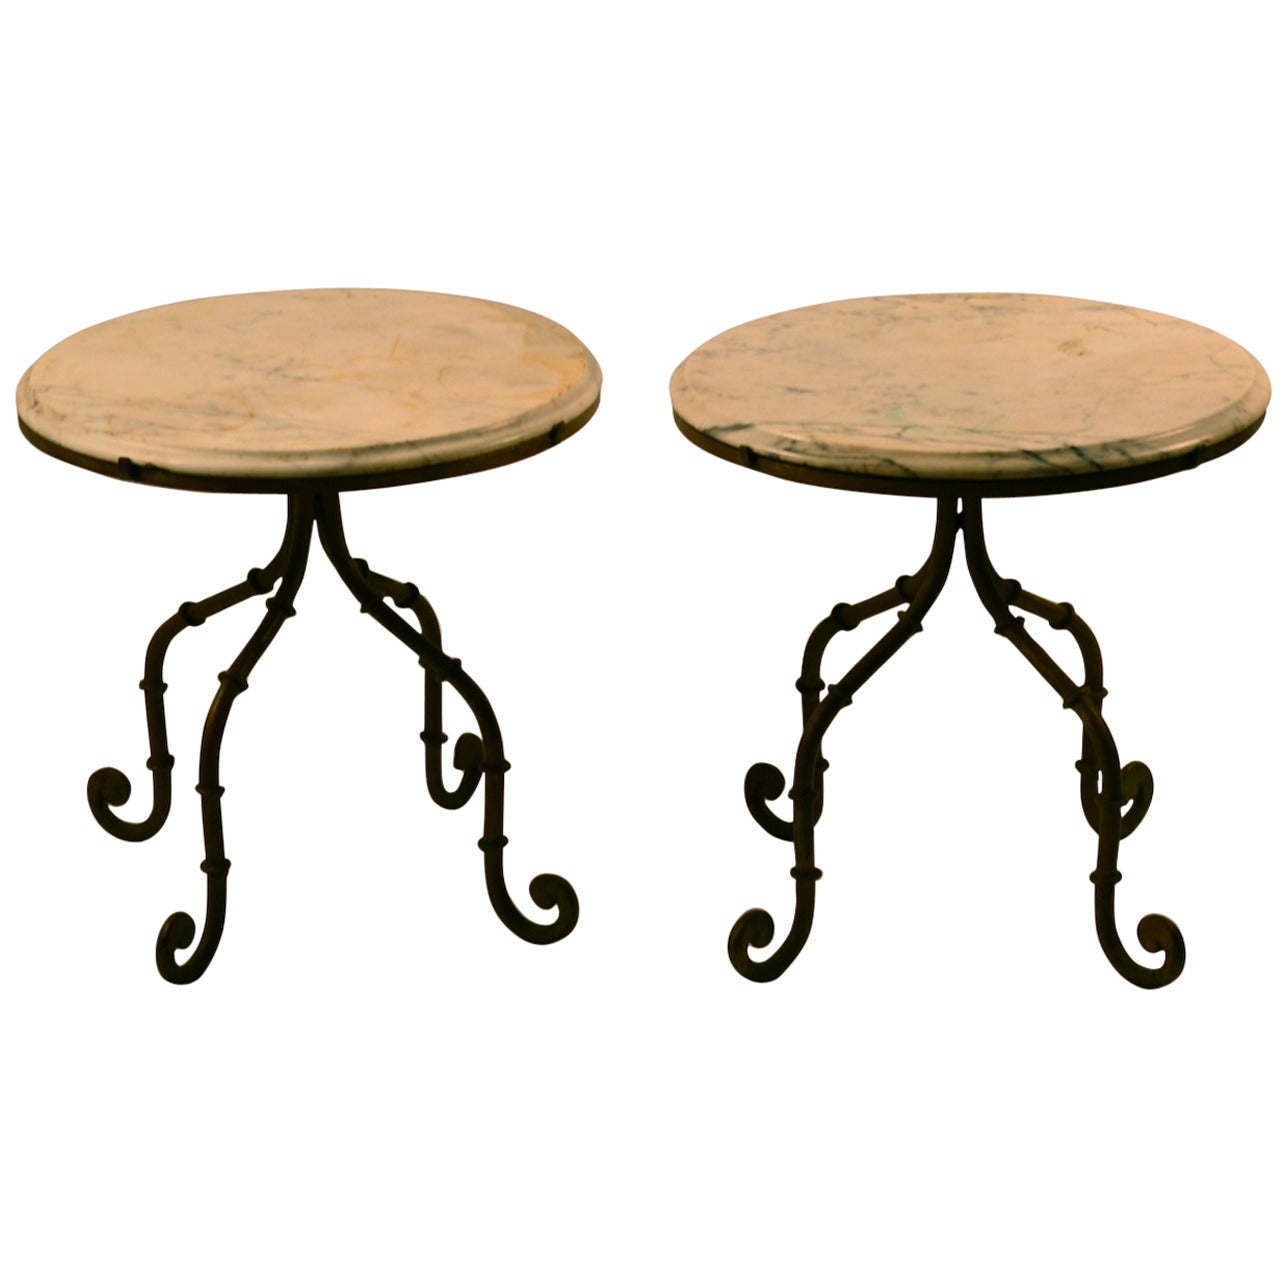 Pair of Marble-Top Tables with Iron Bases